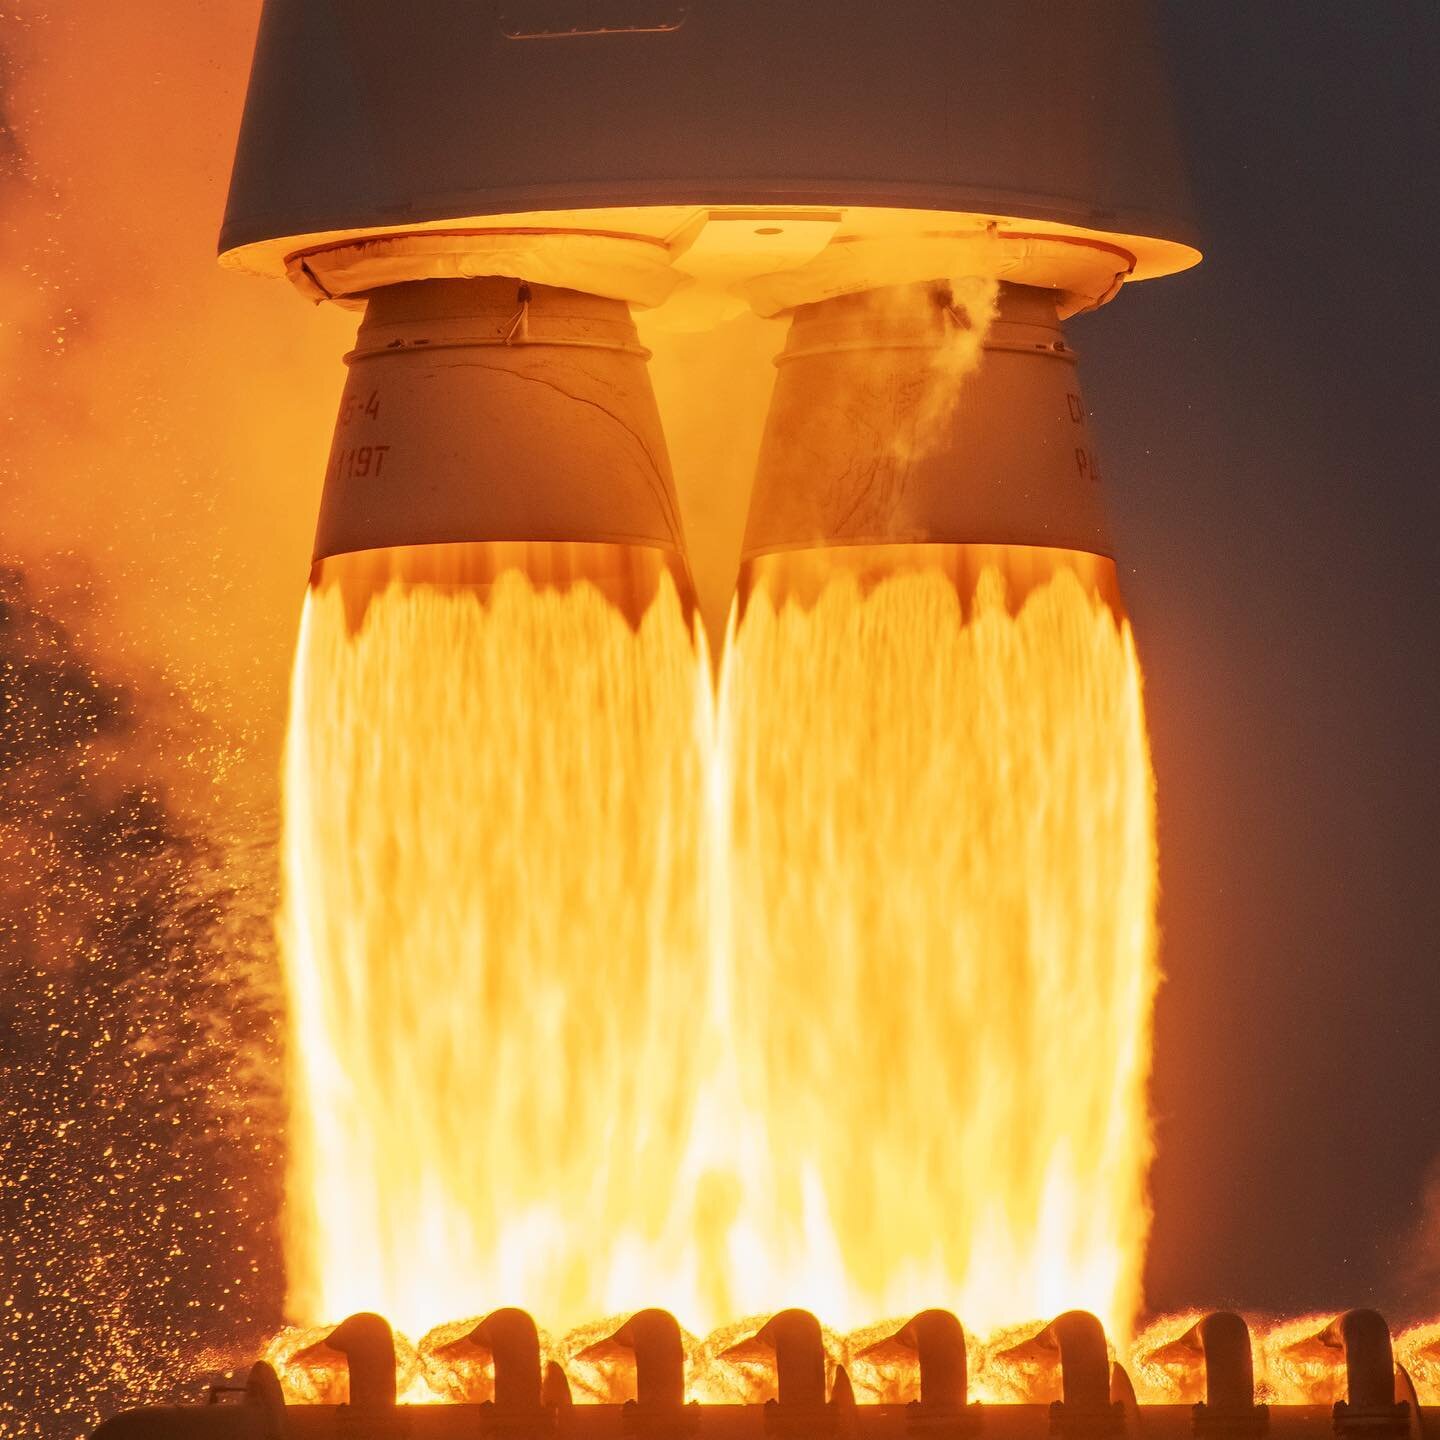 An Energomash RD-180 engine muscling an Atlas V rocket off the launch pad at Vandenberg Space Force Base&rsquo;s SLC-3.